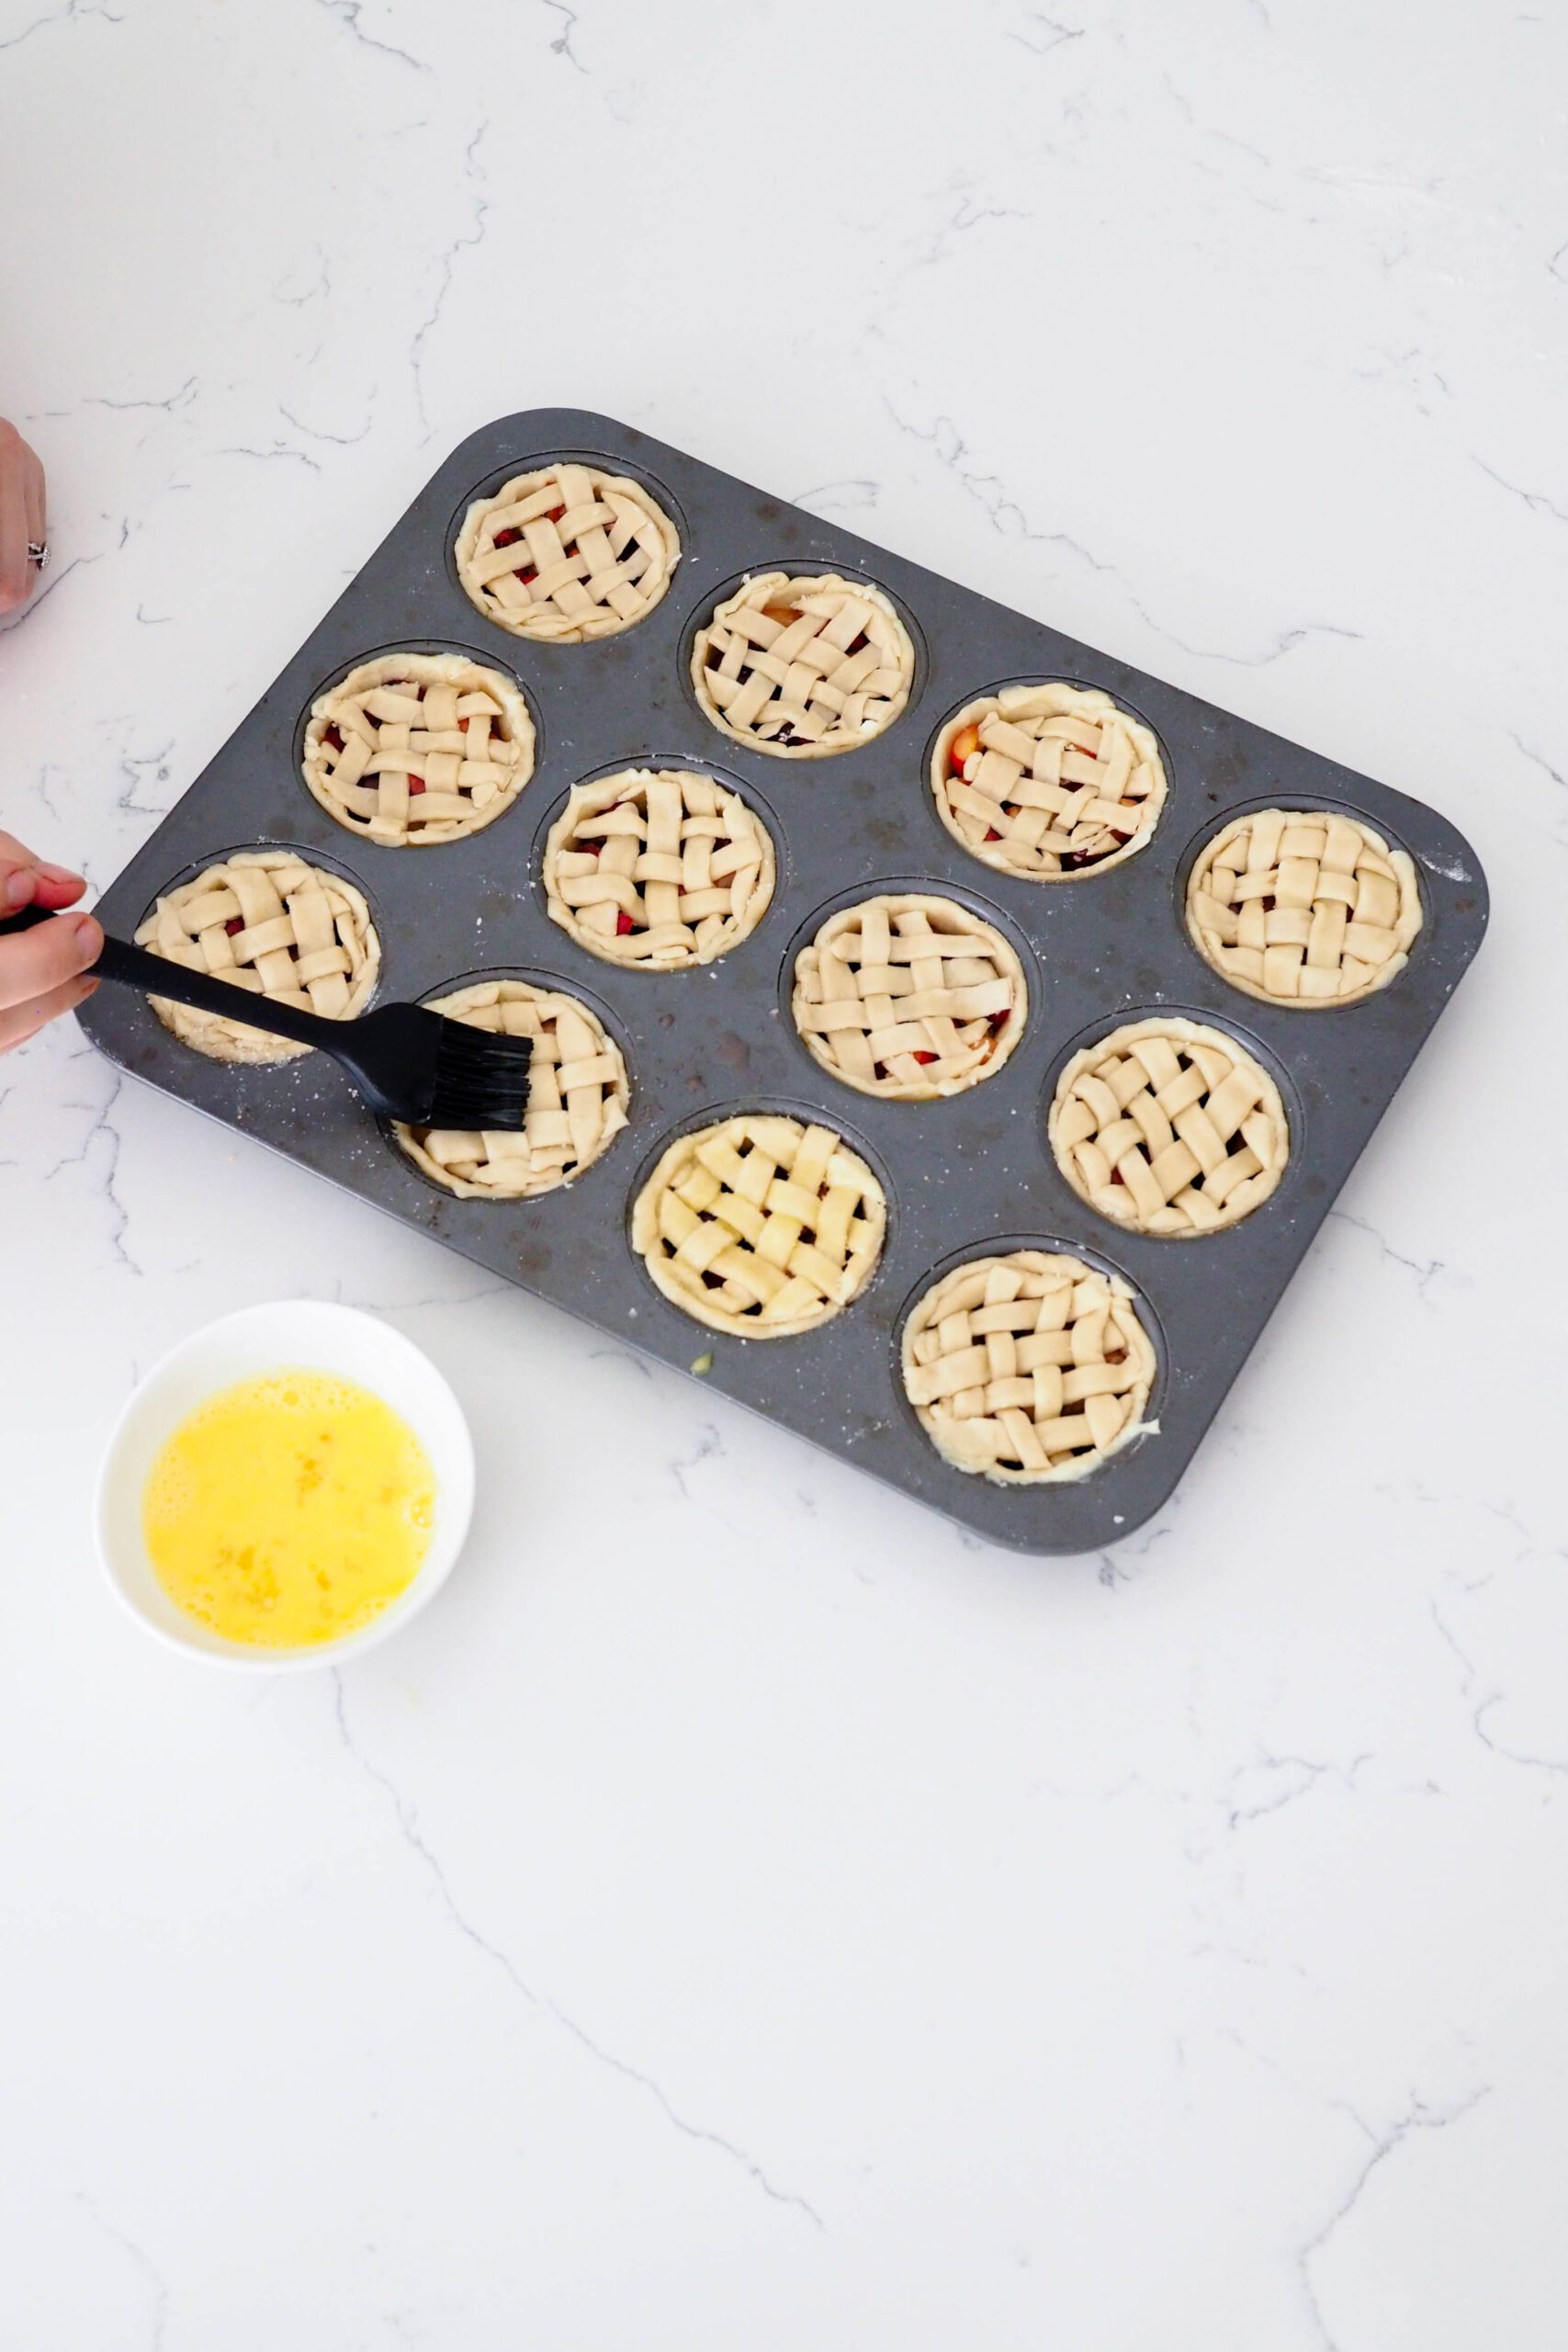 A hand uses a silicone pastry brush to brush egg wash onto mini latticed pies.